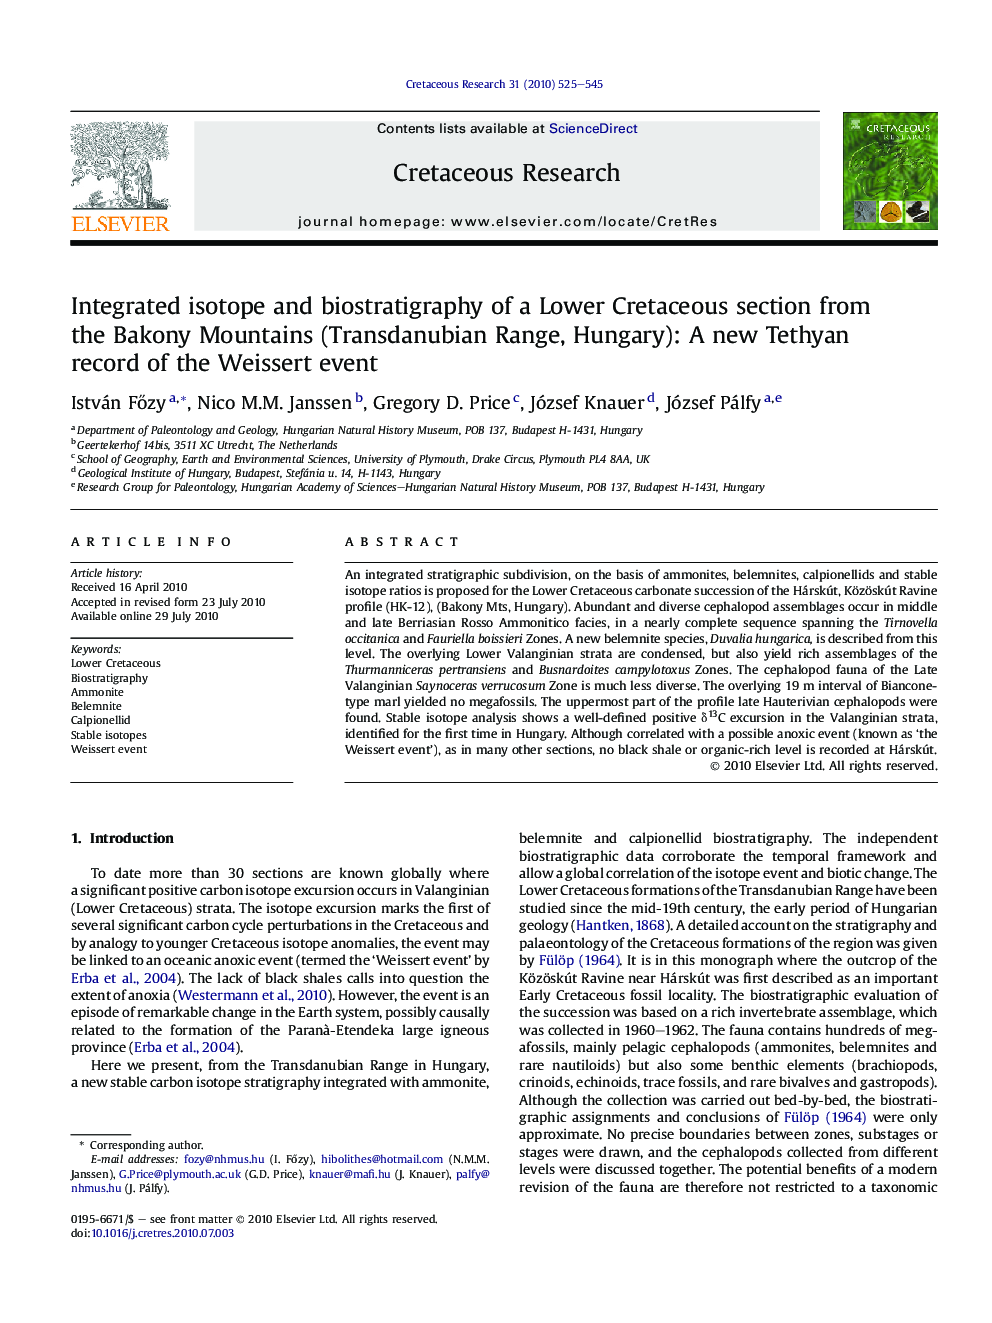 Integrated isotope and biostratigraphy of a Lower Cretaceous section from the Bakony Mountains (Transdanubian Range, Hungary): A new Tethyan record of the Weissert event